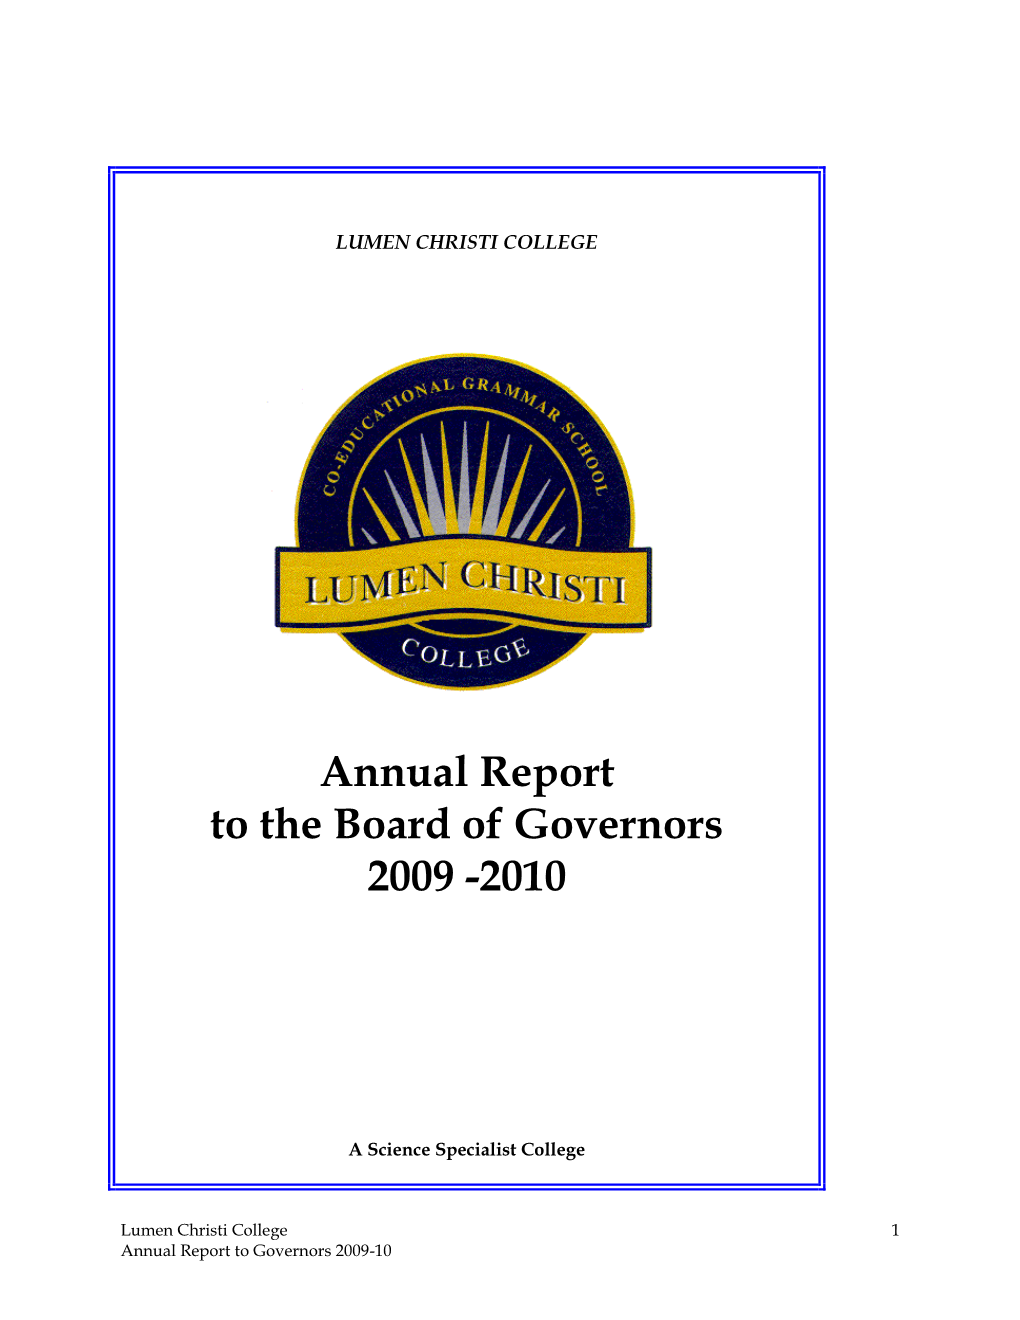 Board of Governors Report 2009-2010